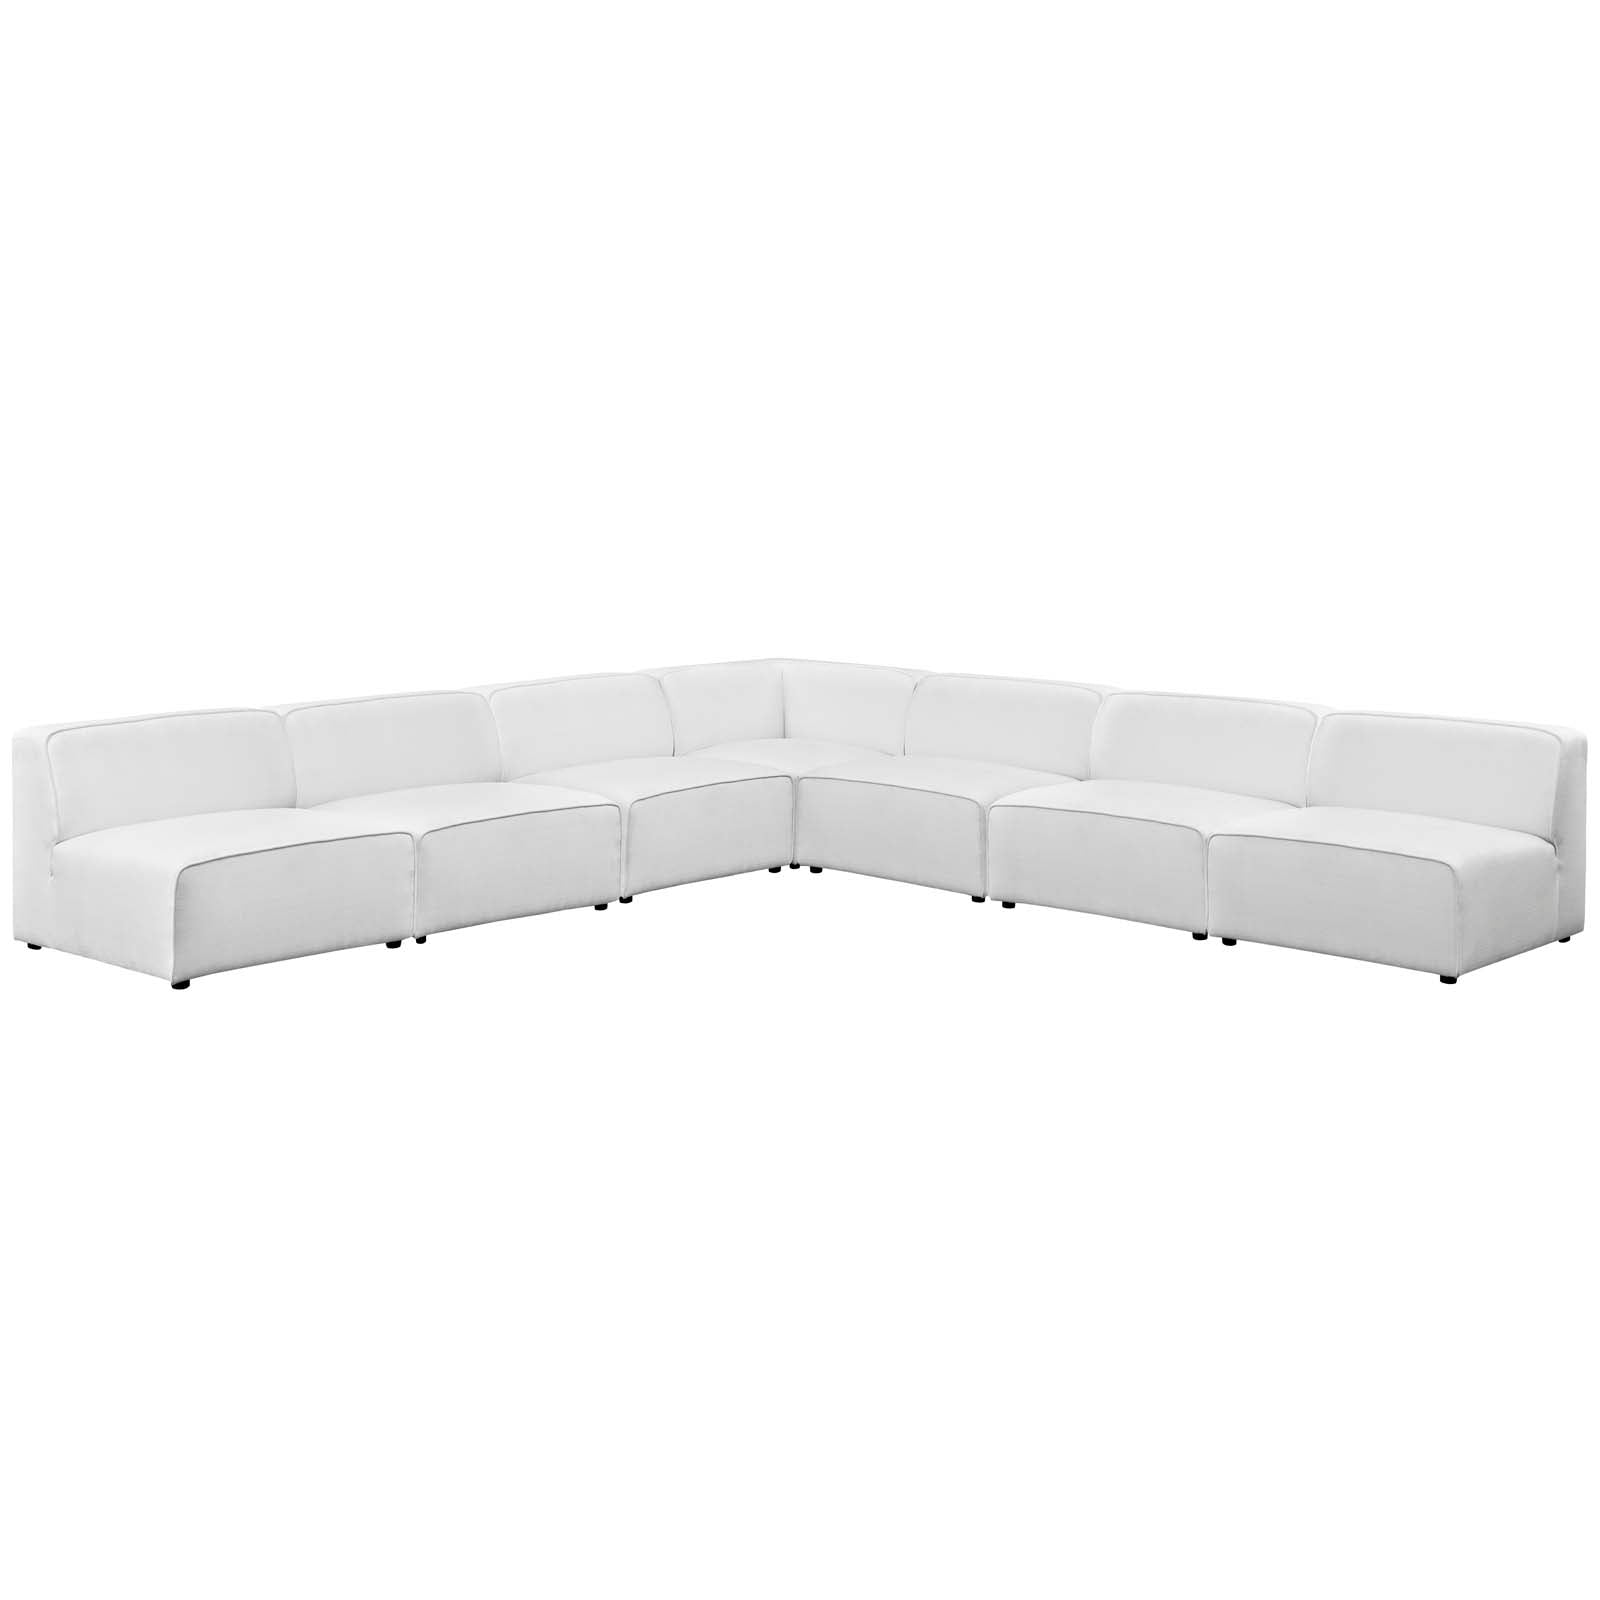 Modway Sectional Sofas - Mingle 7 Piece Upholstered Fabric Sectional Sofa Set White